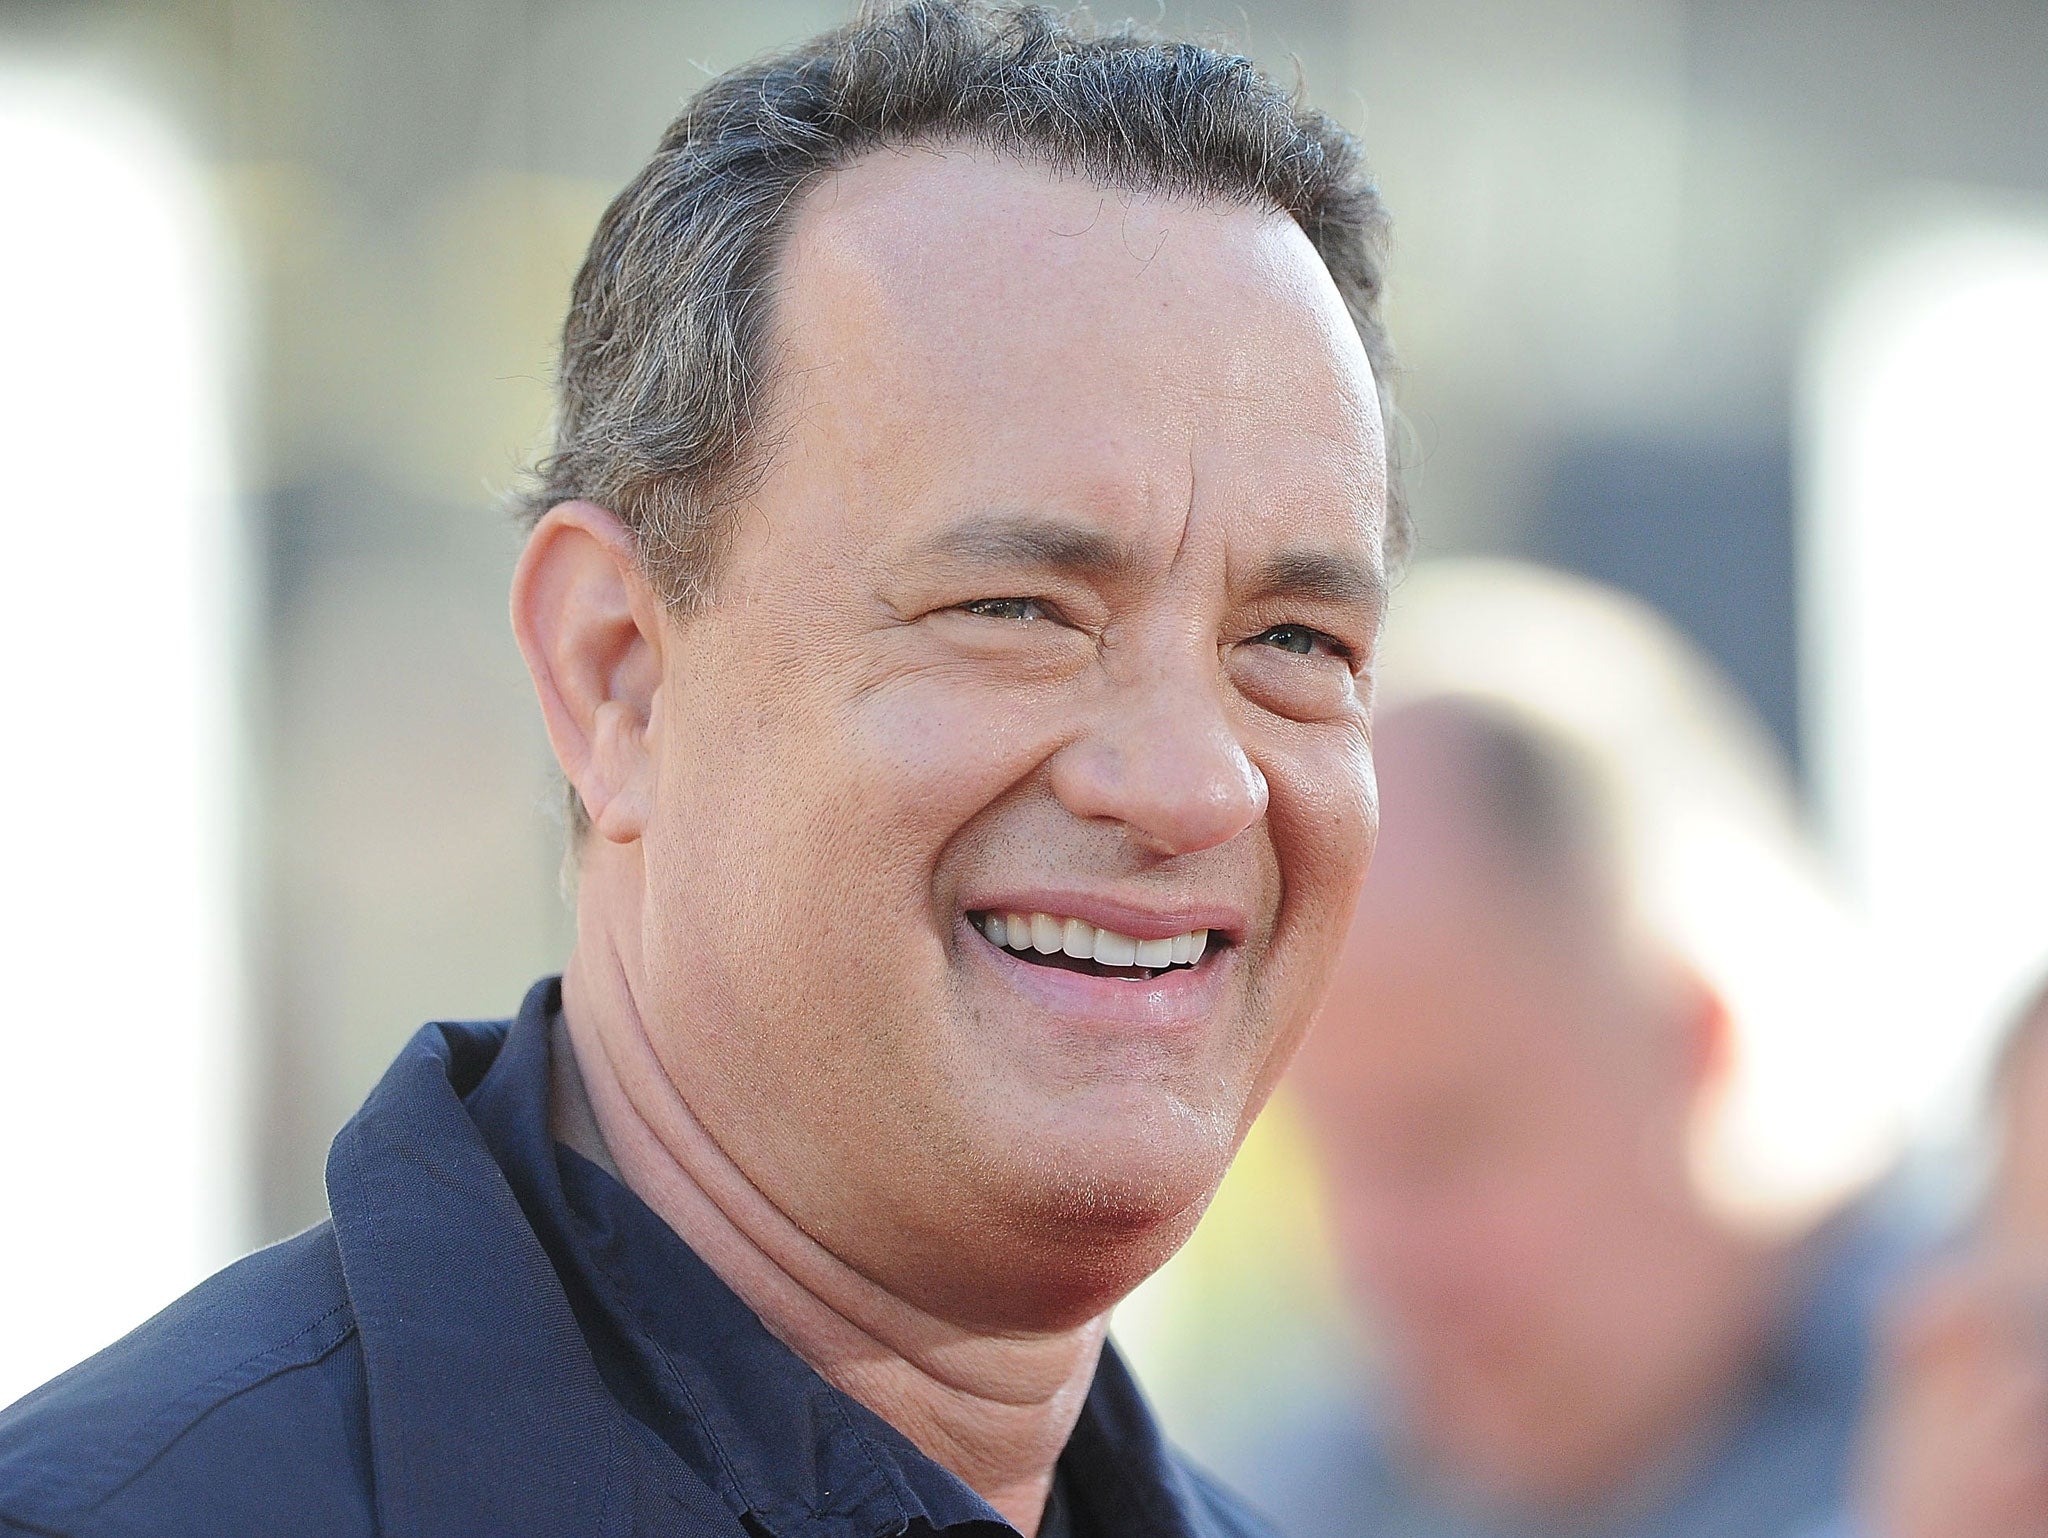 Tom Hanks has thanked a New York stranger who returned his lost credit card